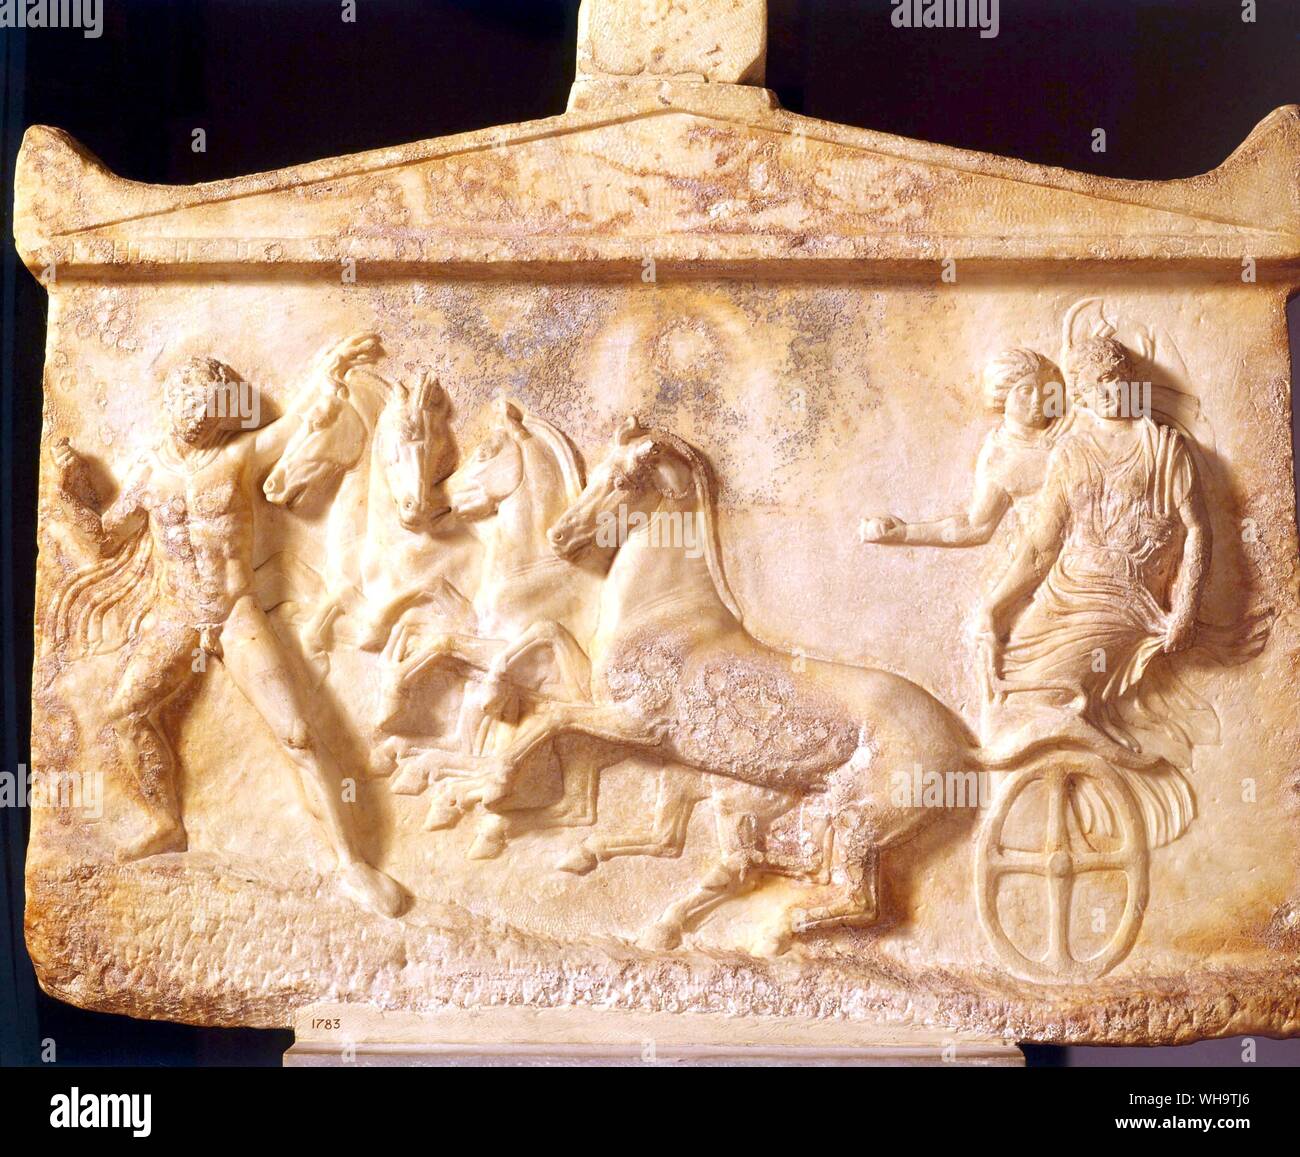 Gravestone showing a Greek hero, Echelos, paying more attention to Basile, whom he is rescuing from the underworld, than to the horses, who are appropriately having to struggle uphill. Hermes, who shows the way, probably held a painted torch in his left hand. Stock Photo